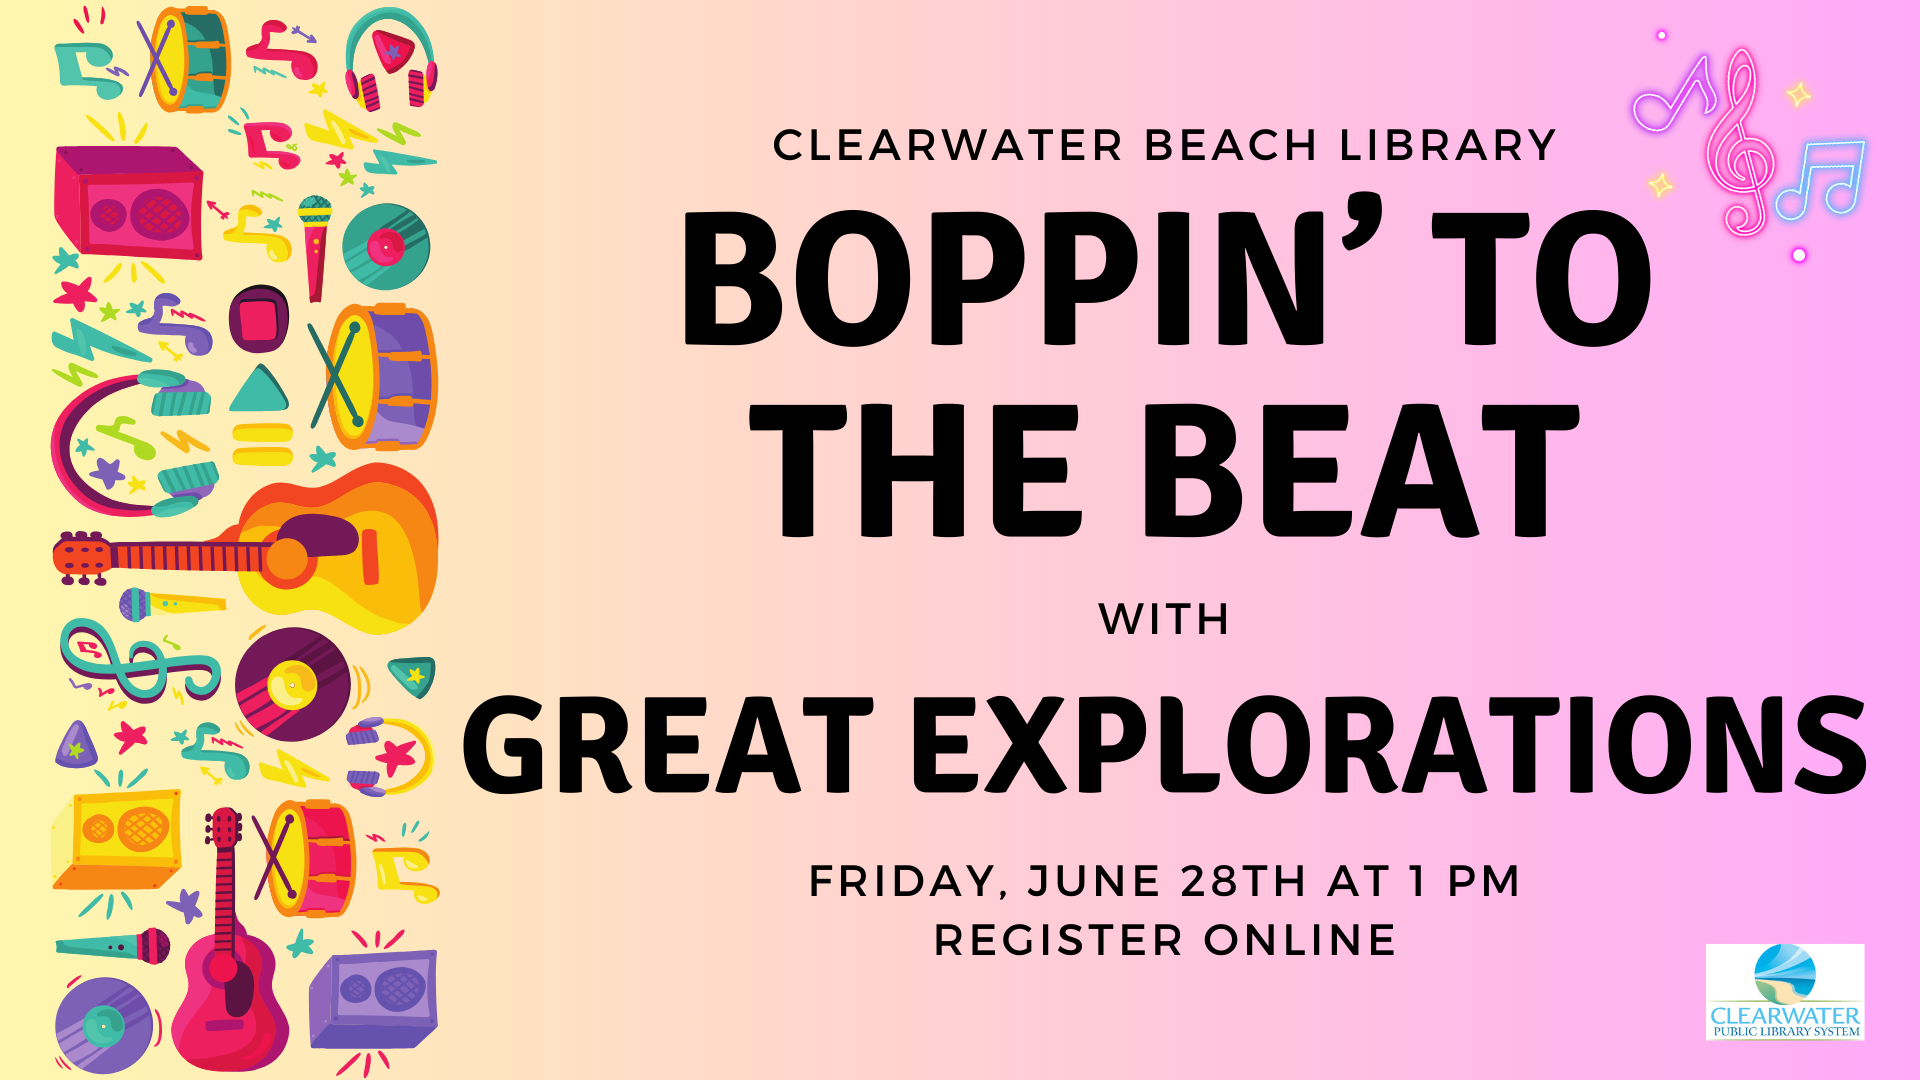 Boppin to the beat image